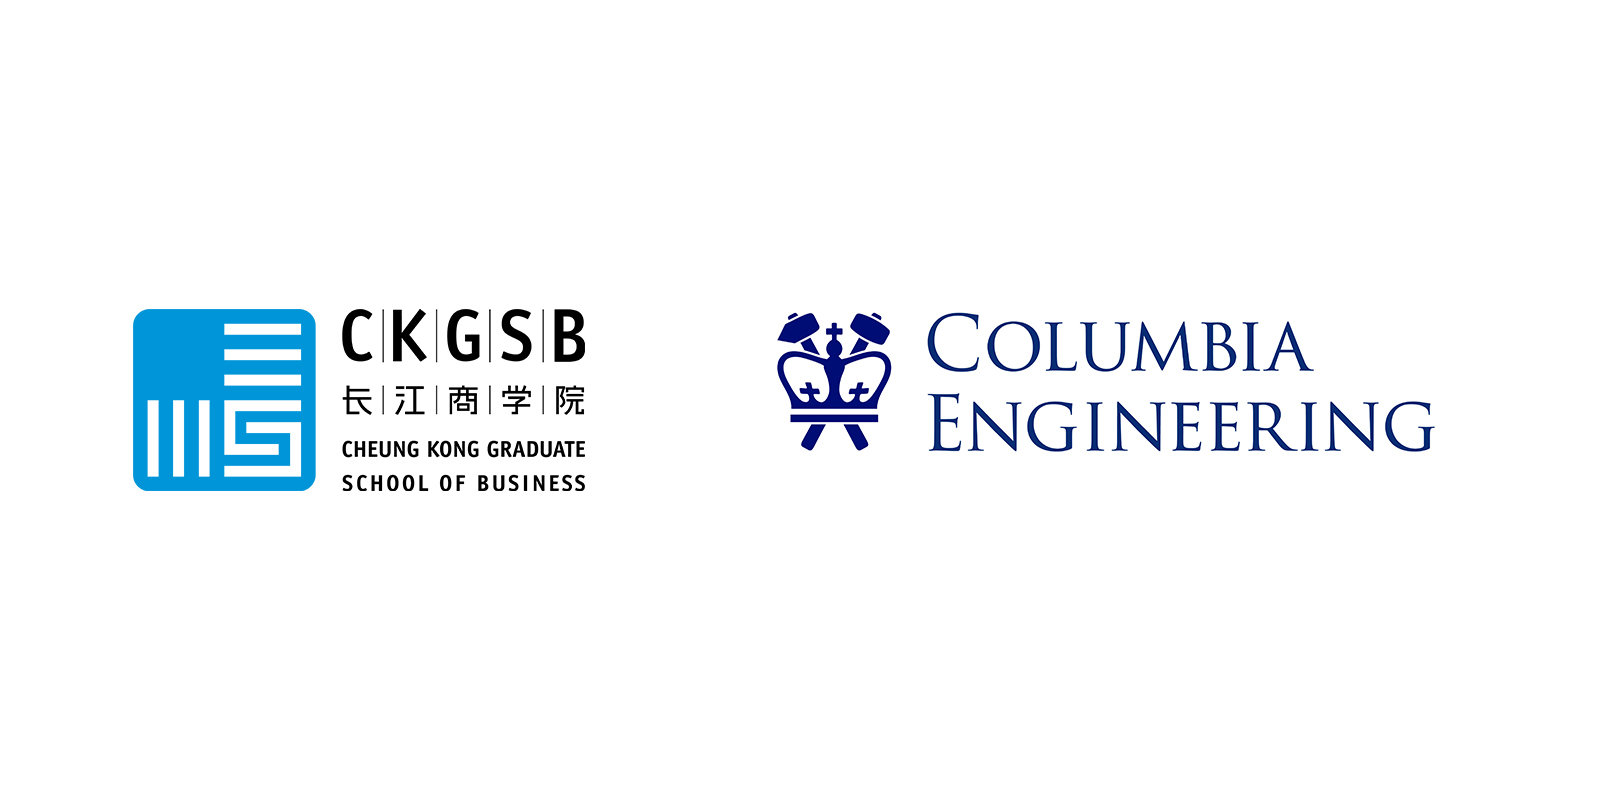 New Pivotal Program by CKGSB and Columbia Engineering on Digital Innovation  - CKGSB